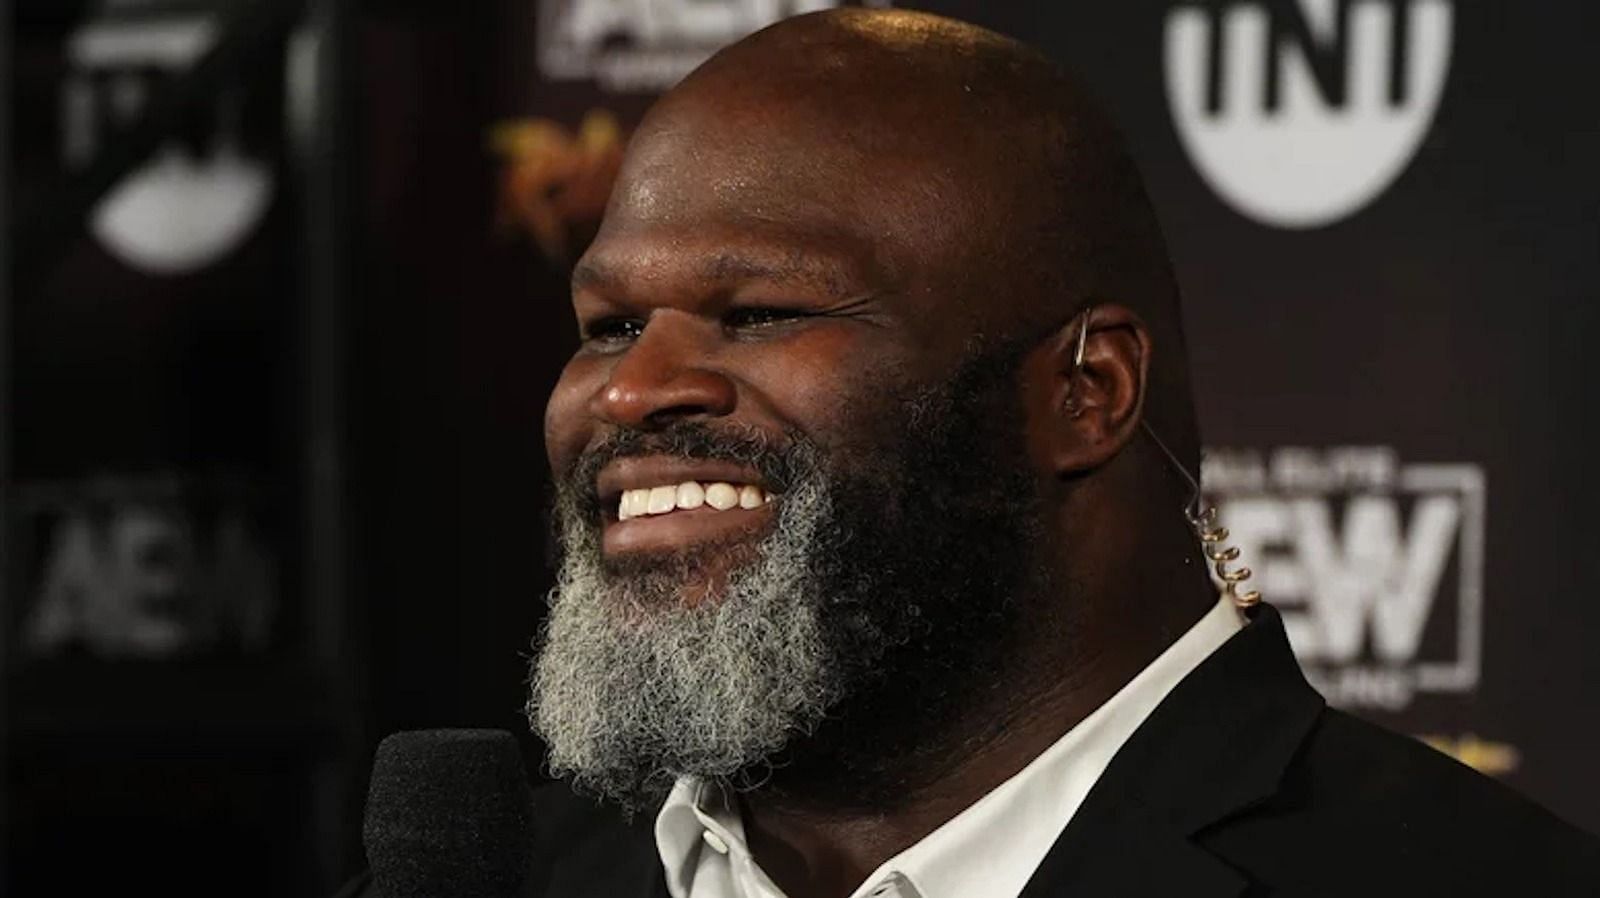 Mark Henry is currently signed to AEW.